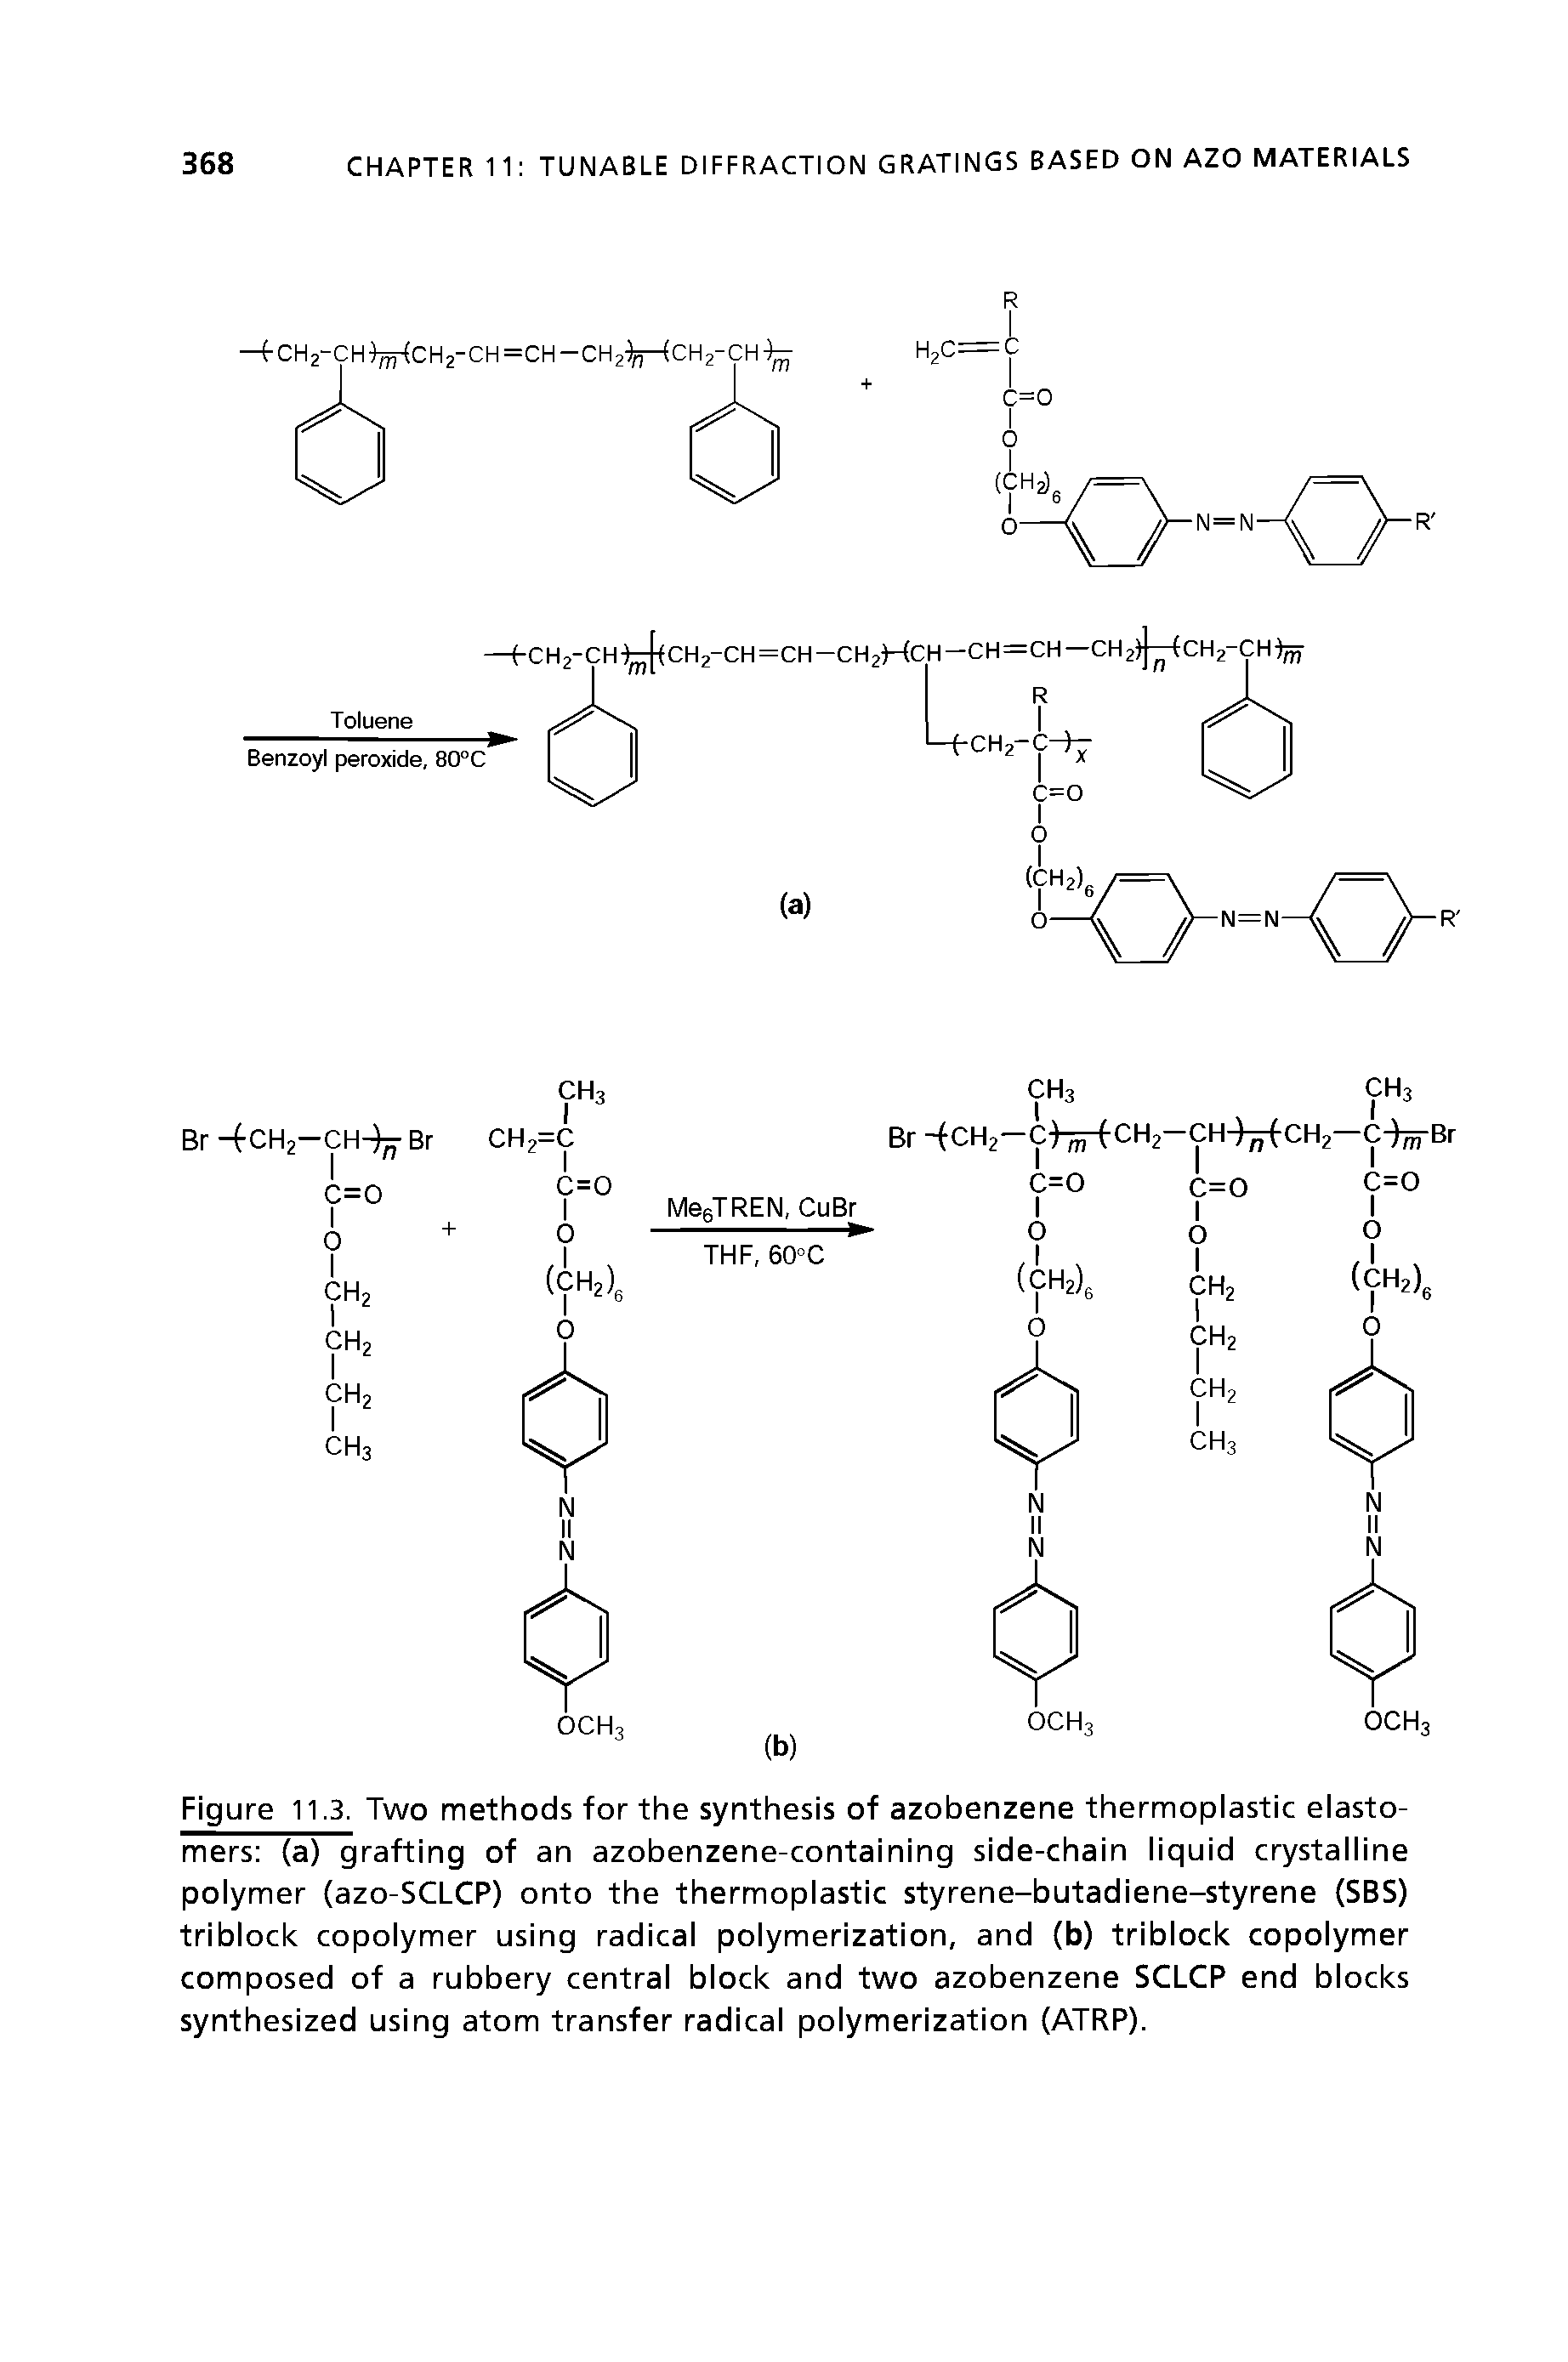 Figure 11.3. Two methods for the synthesis of azobenzene thermopiastic eiasto-mers (a) grafting of an azobenzene-containing side-chain iiquid crystaiiine polymer (azo-SCLCP) onto the thermoplastic styrene-butadiene-styrene (SBS) tribiock copoiymer using radical polymerization, and (b) tribiock copoiymer composed of a rubbery centrai block and two azobenzene SCLCP end blocks synthesized using atom transfer radical polymerization (ATRP).